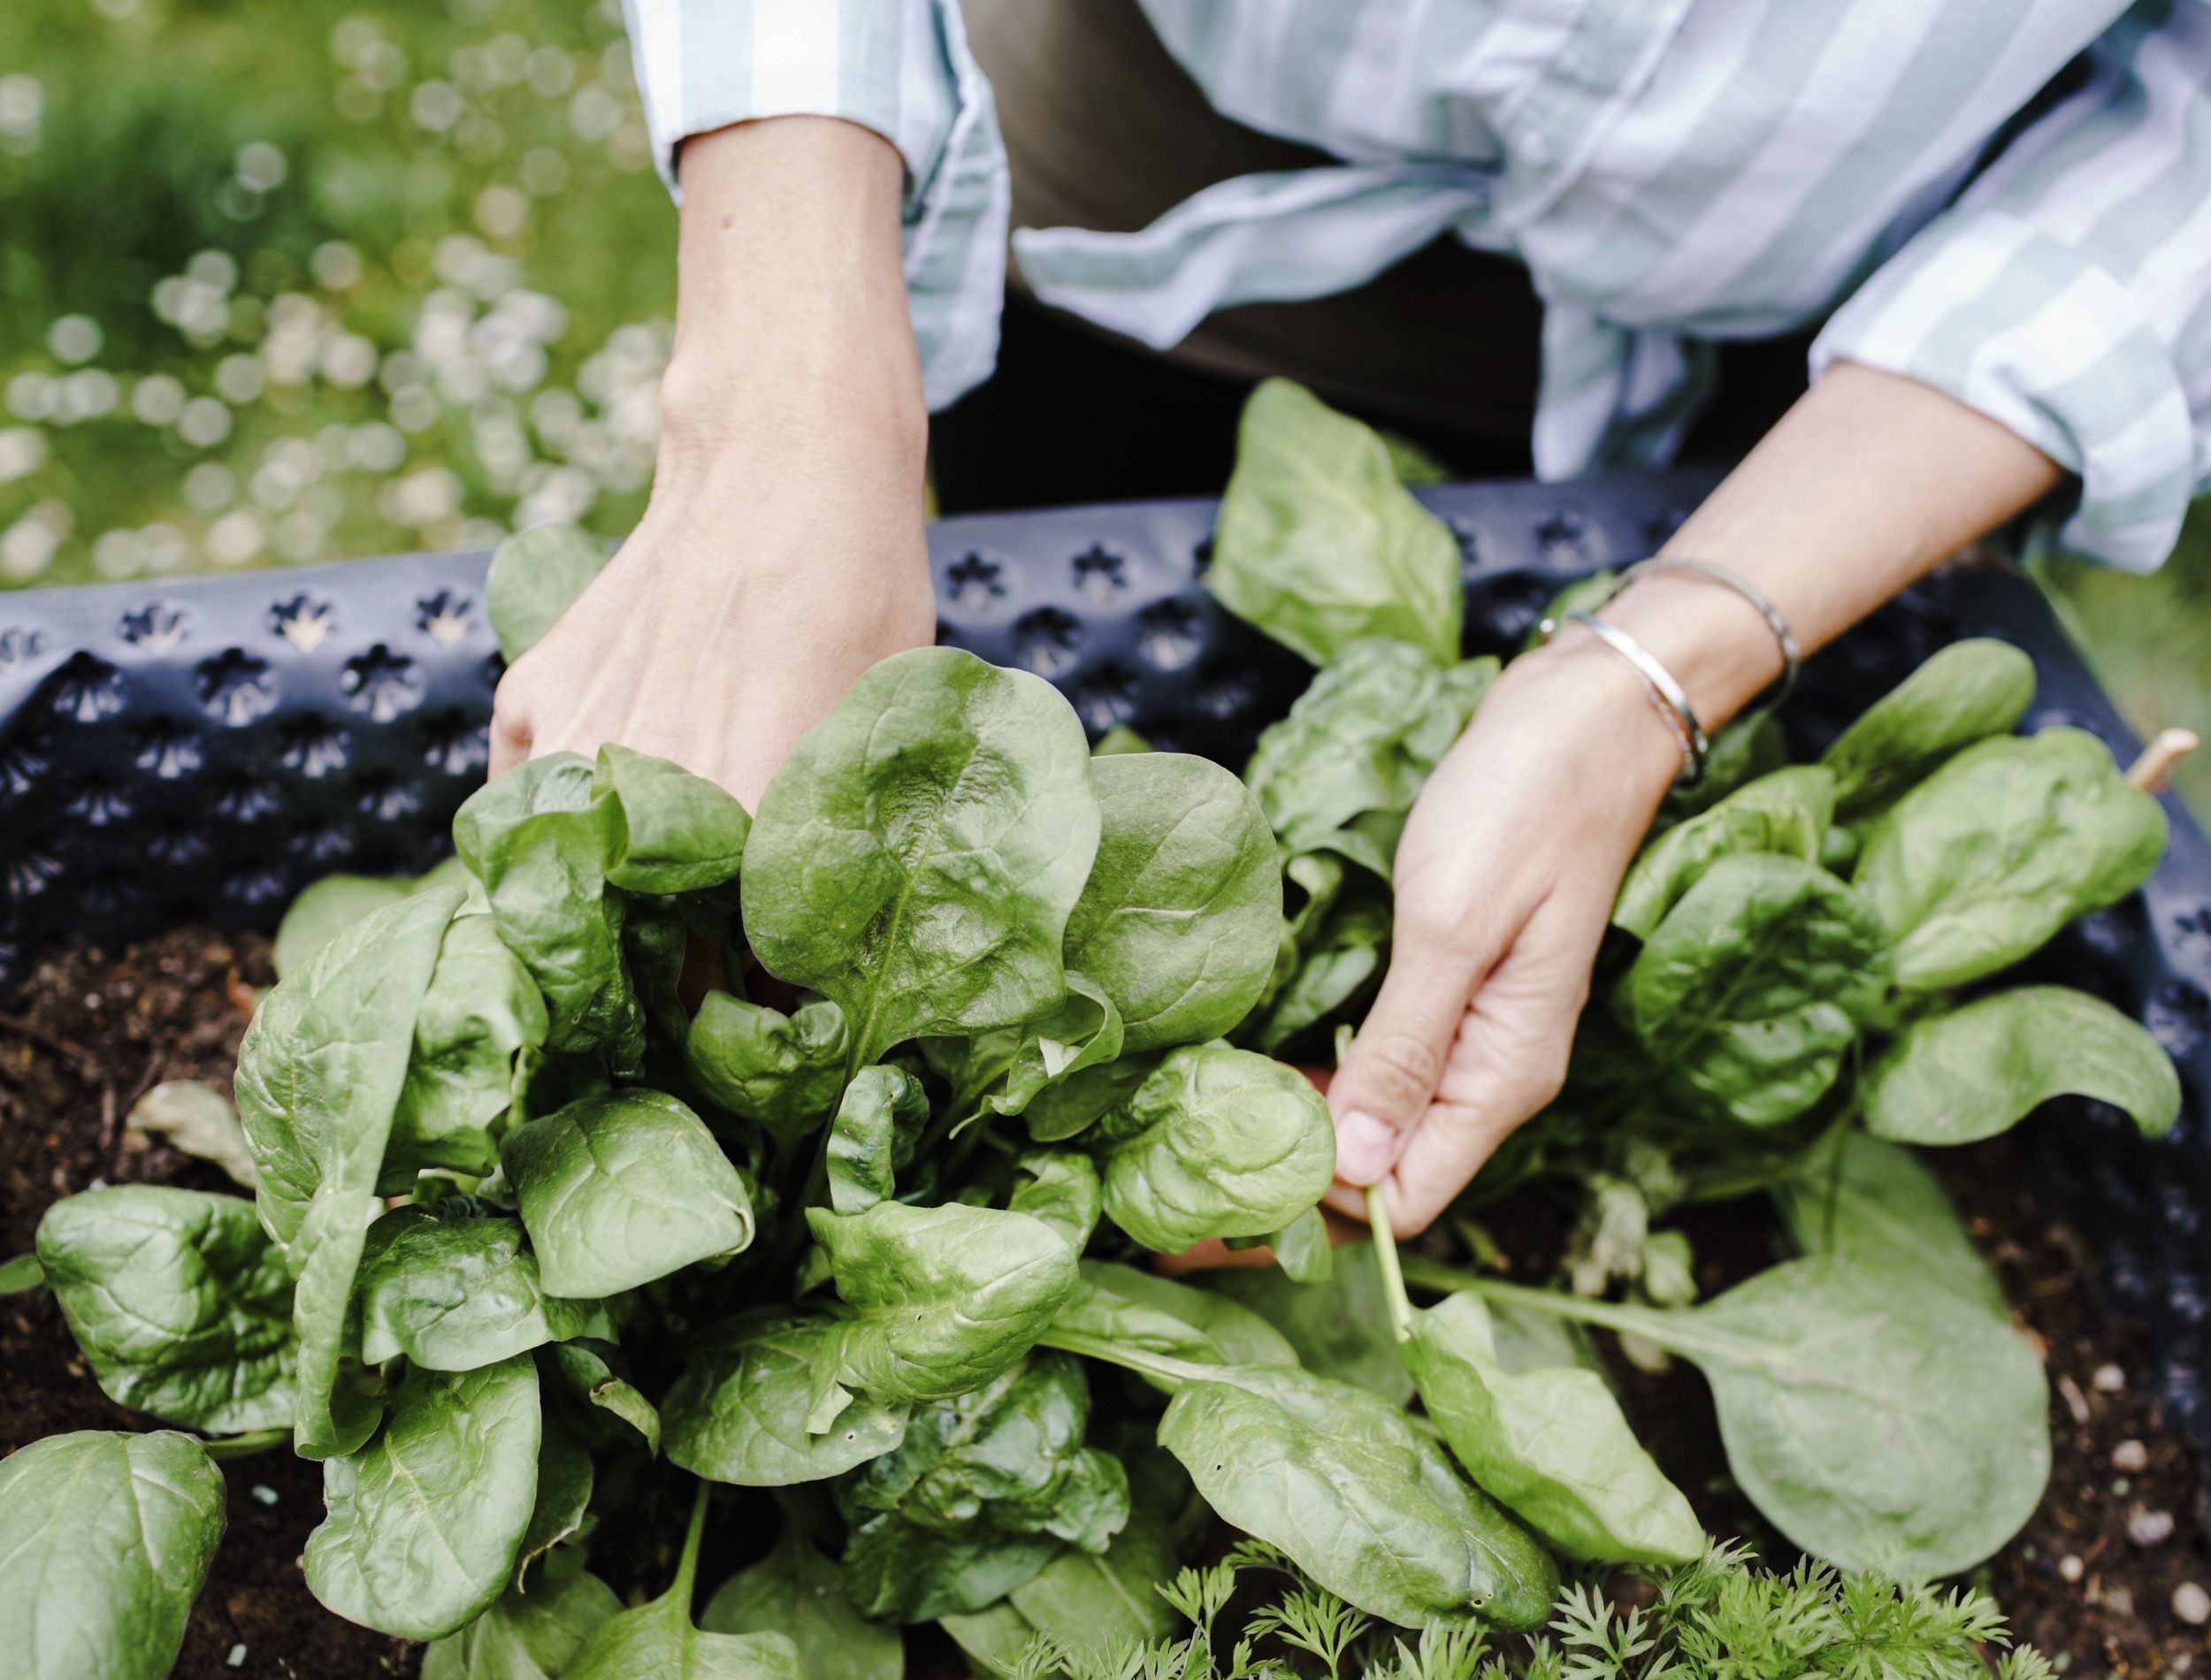 Person  harvests vegetables like lettuce, spinach, radishes, from raised beds in garden